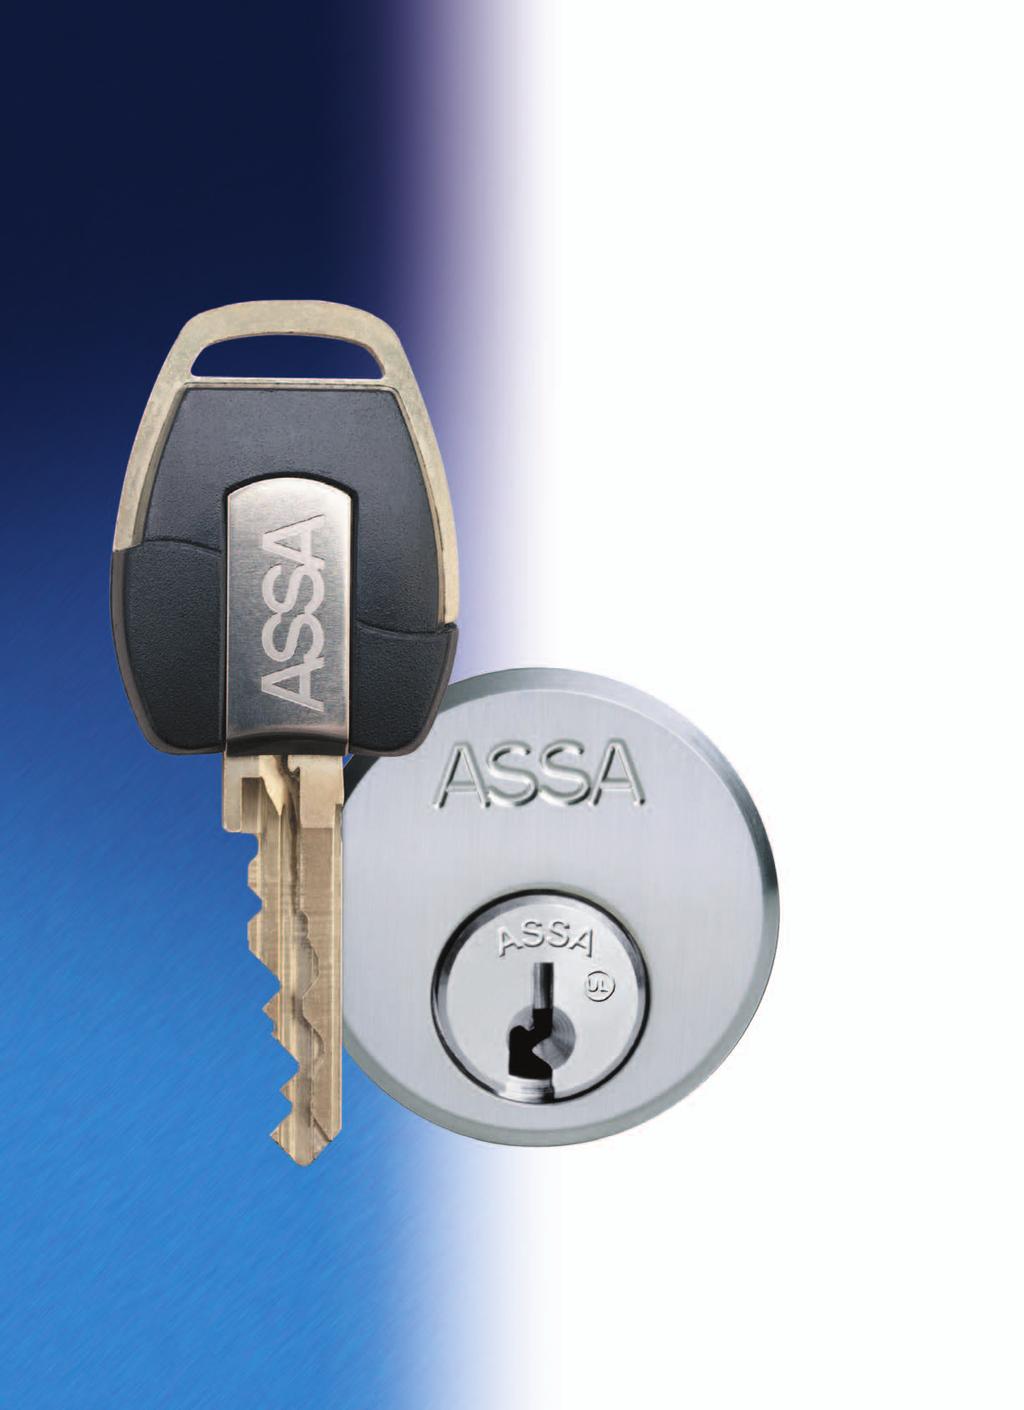 ULTIMATE KEY CONTROL CLIQ Technology Unparalleled Key Control For Today s Industry Over the past twenty years, high security cylinder needs have changed from an emphasis on pick resistance to maximum